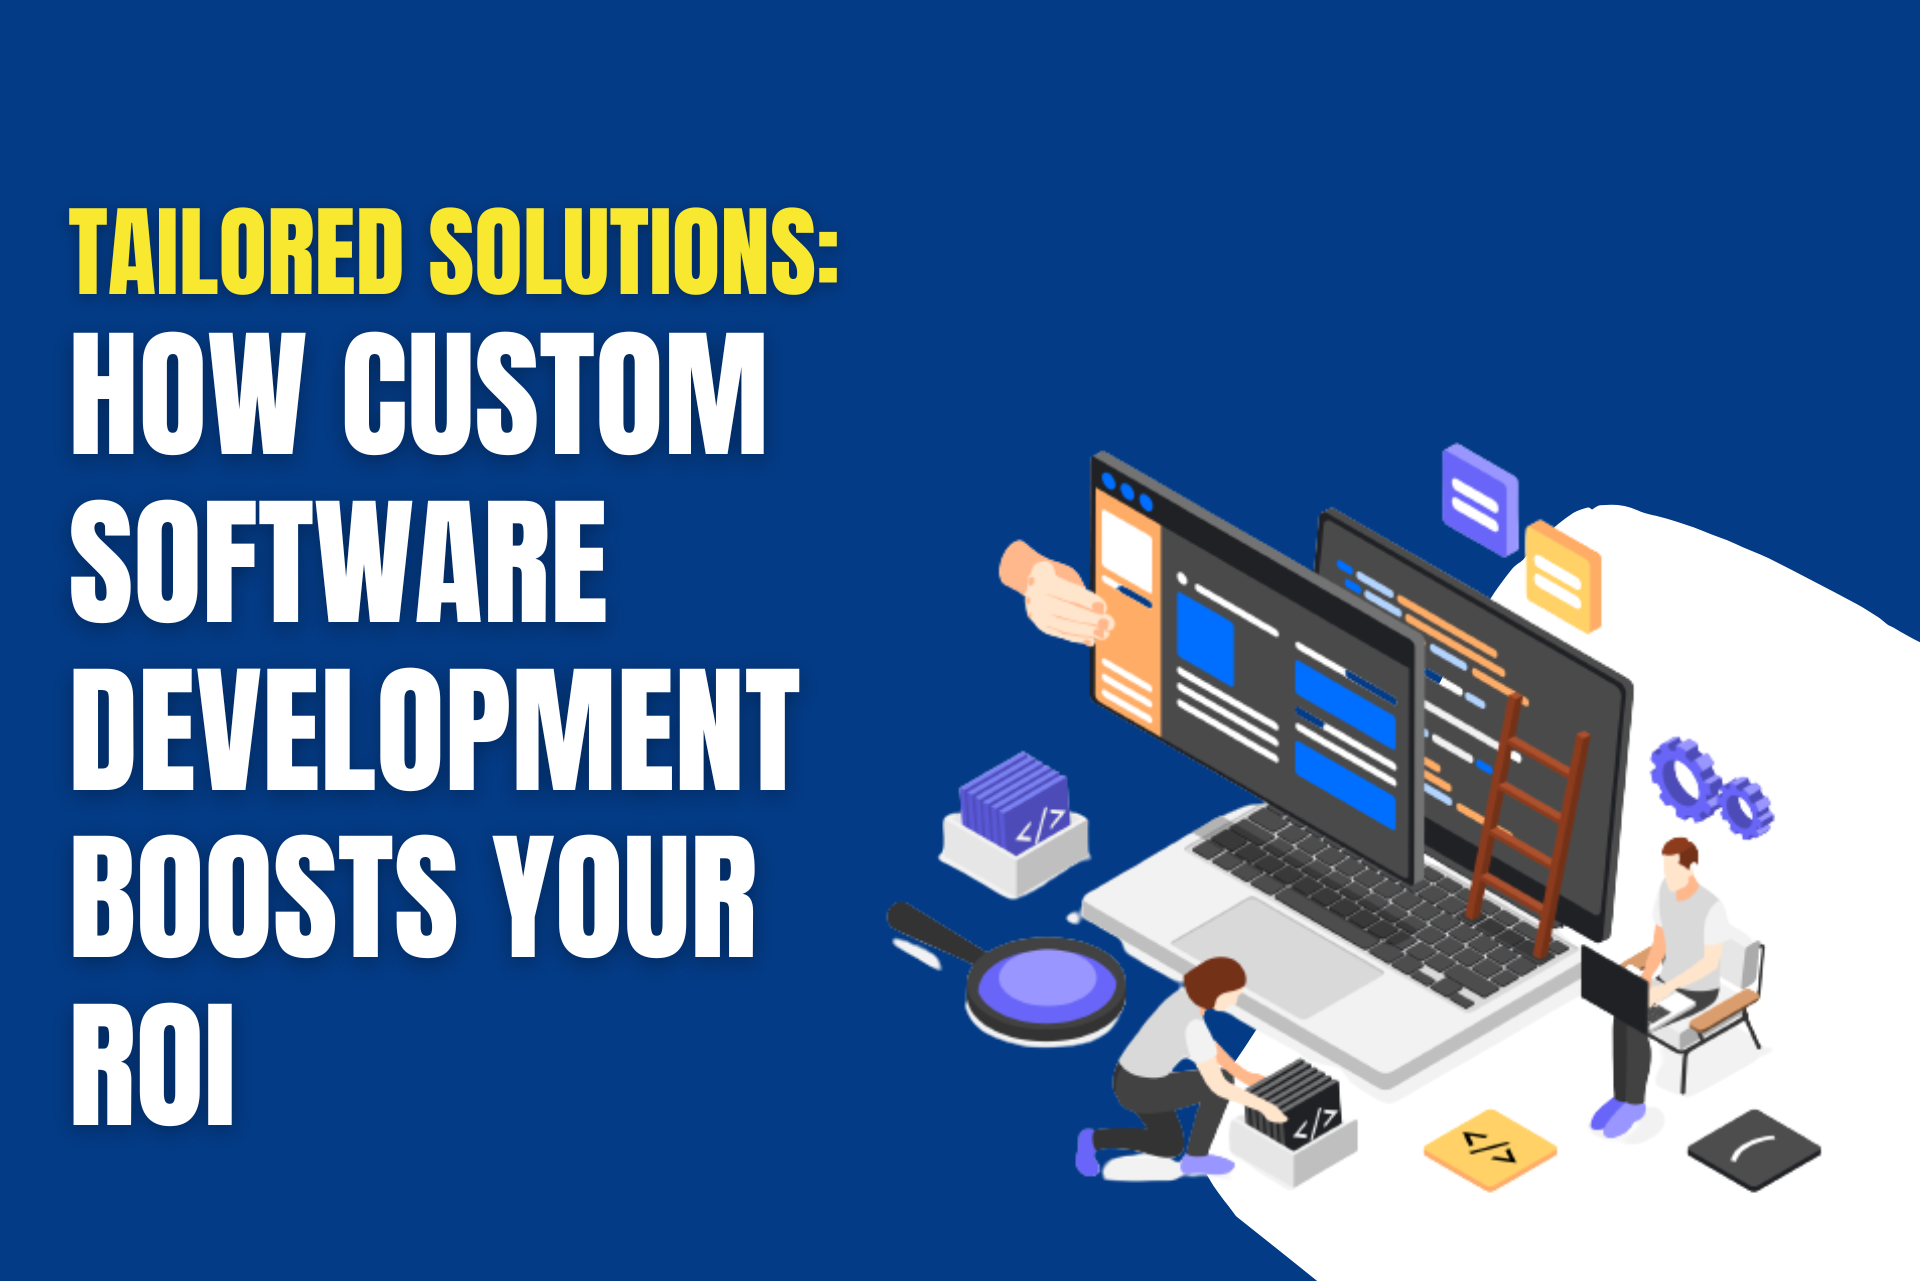 Tailored Solutions: How Custom Software Development Boosts Your ROI